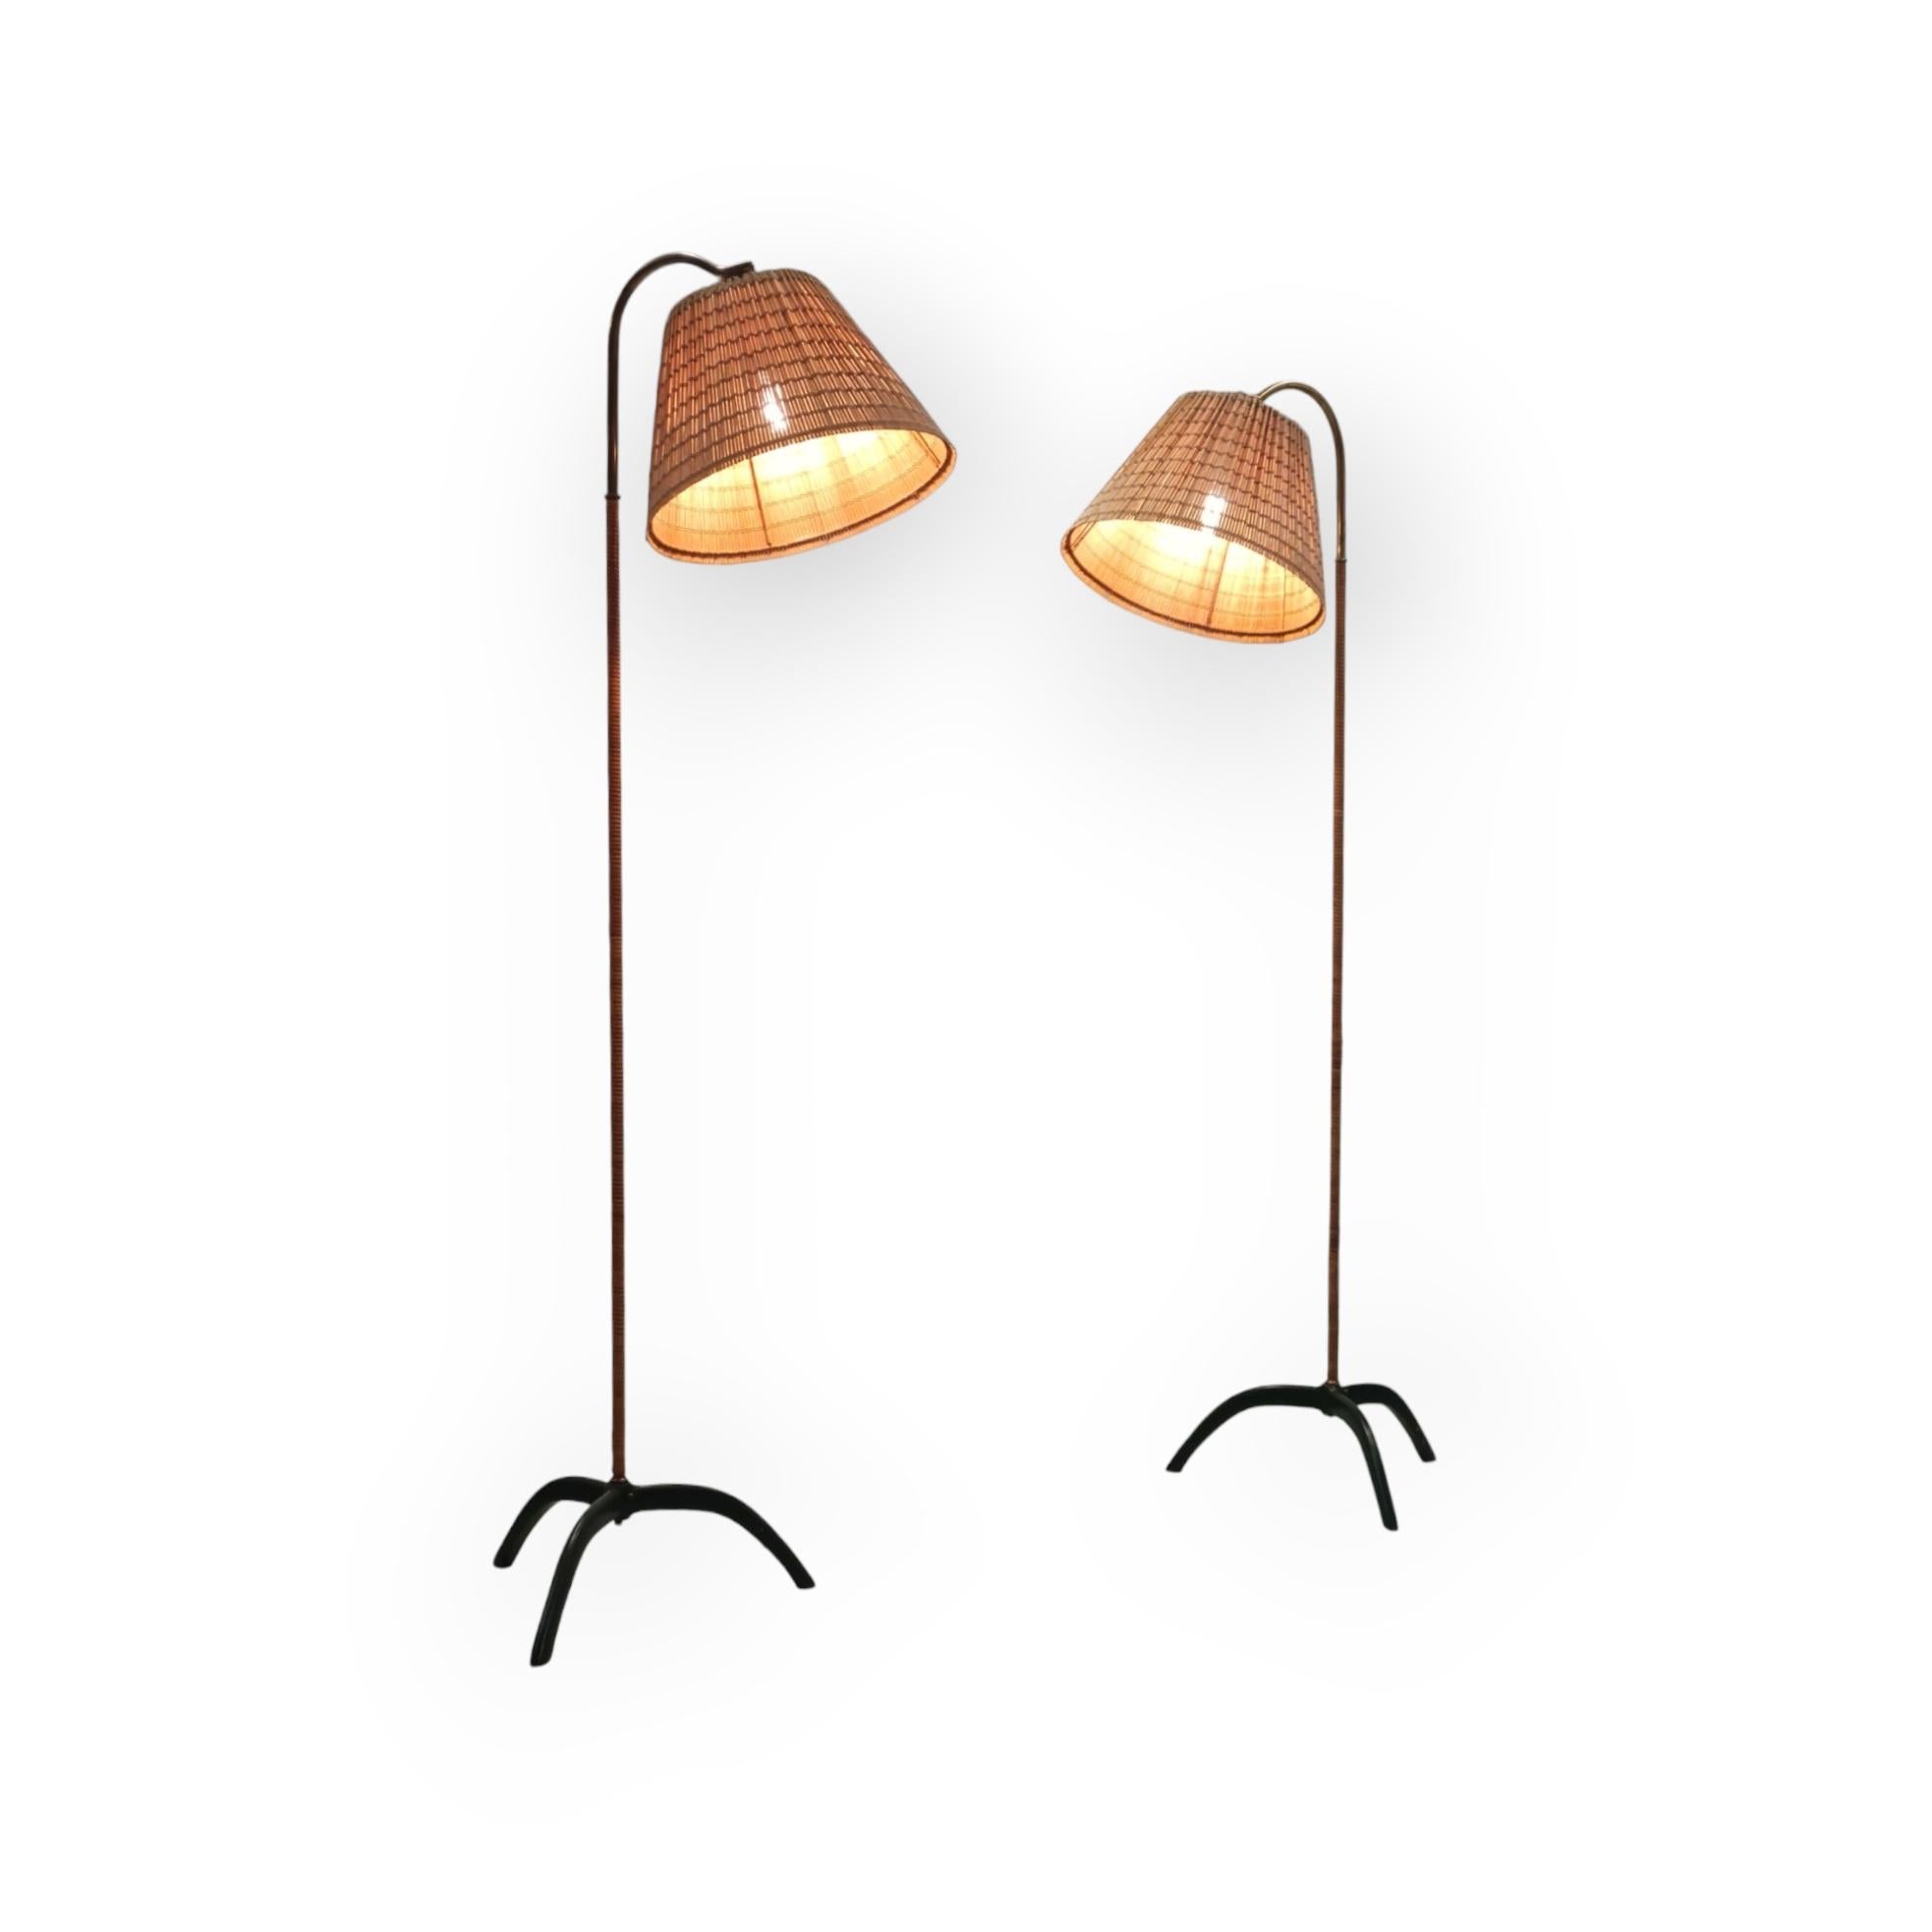 A Pair of Paavo Tynell Floor Lamps model. 9609, Taito Oy 3